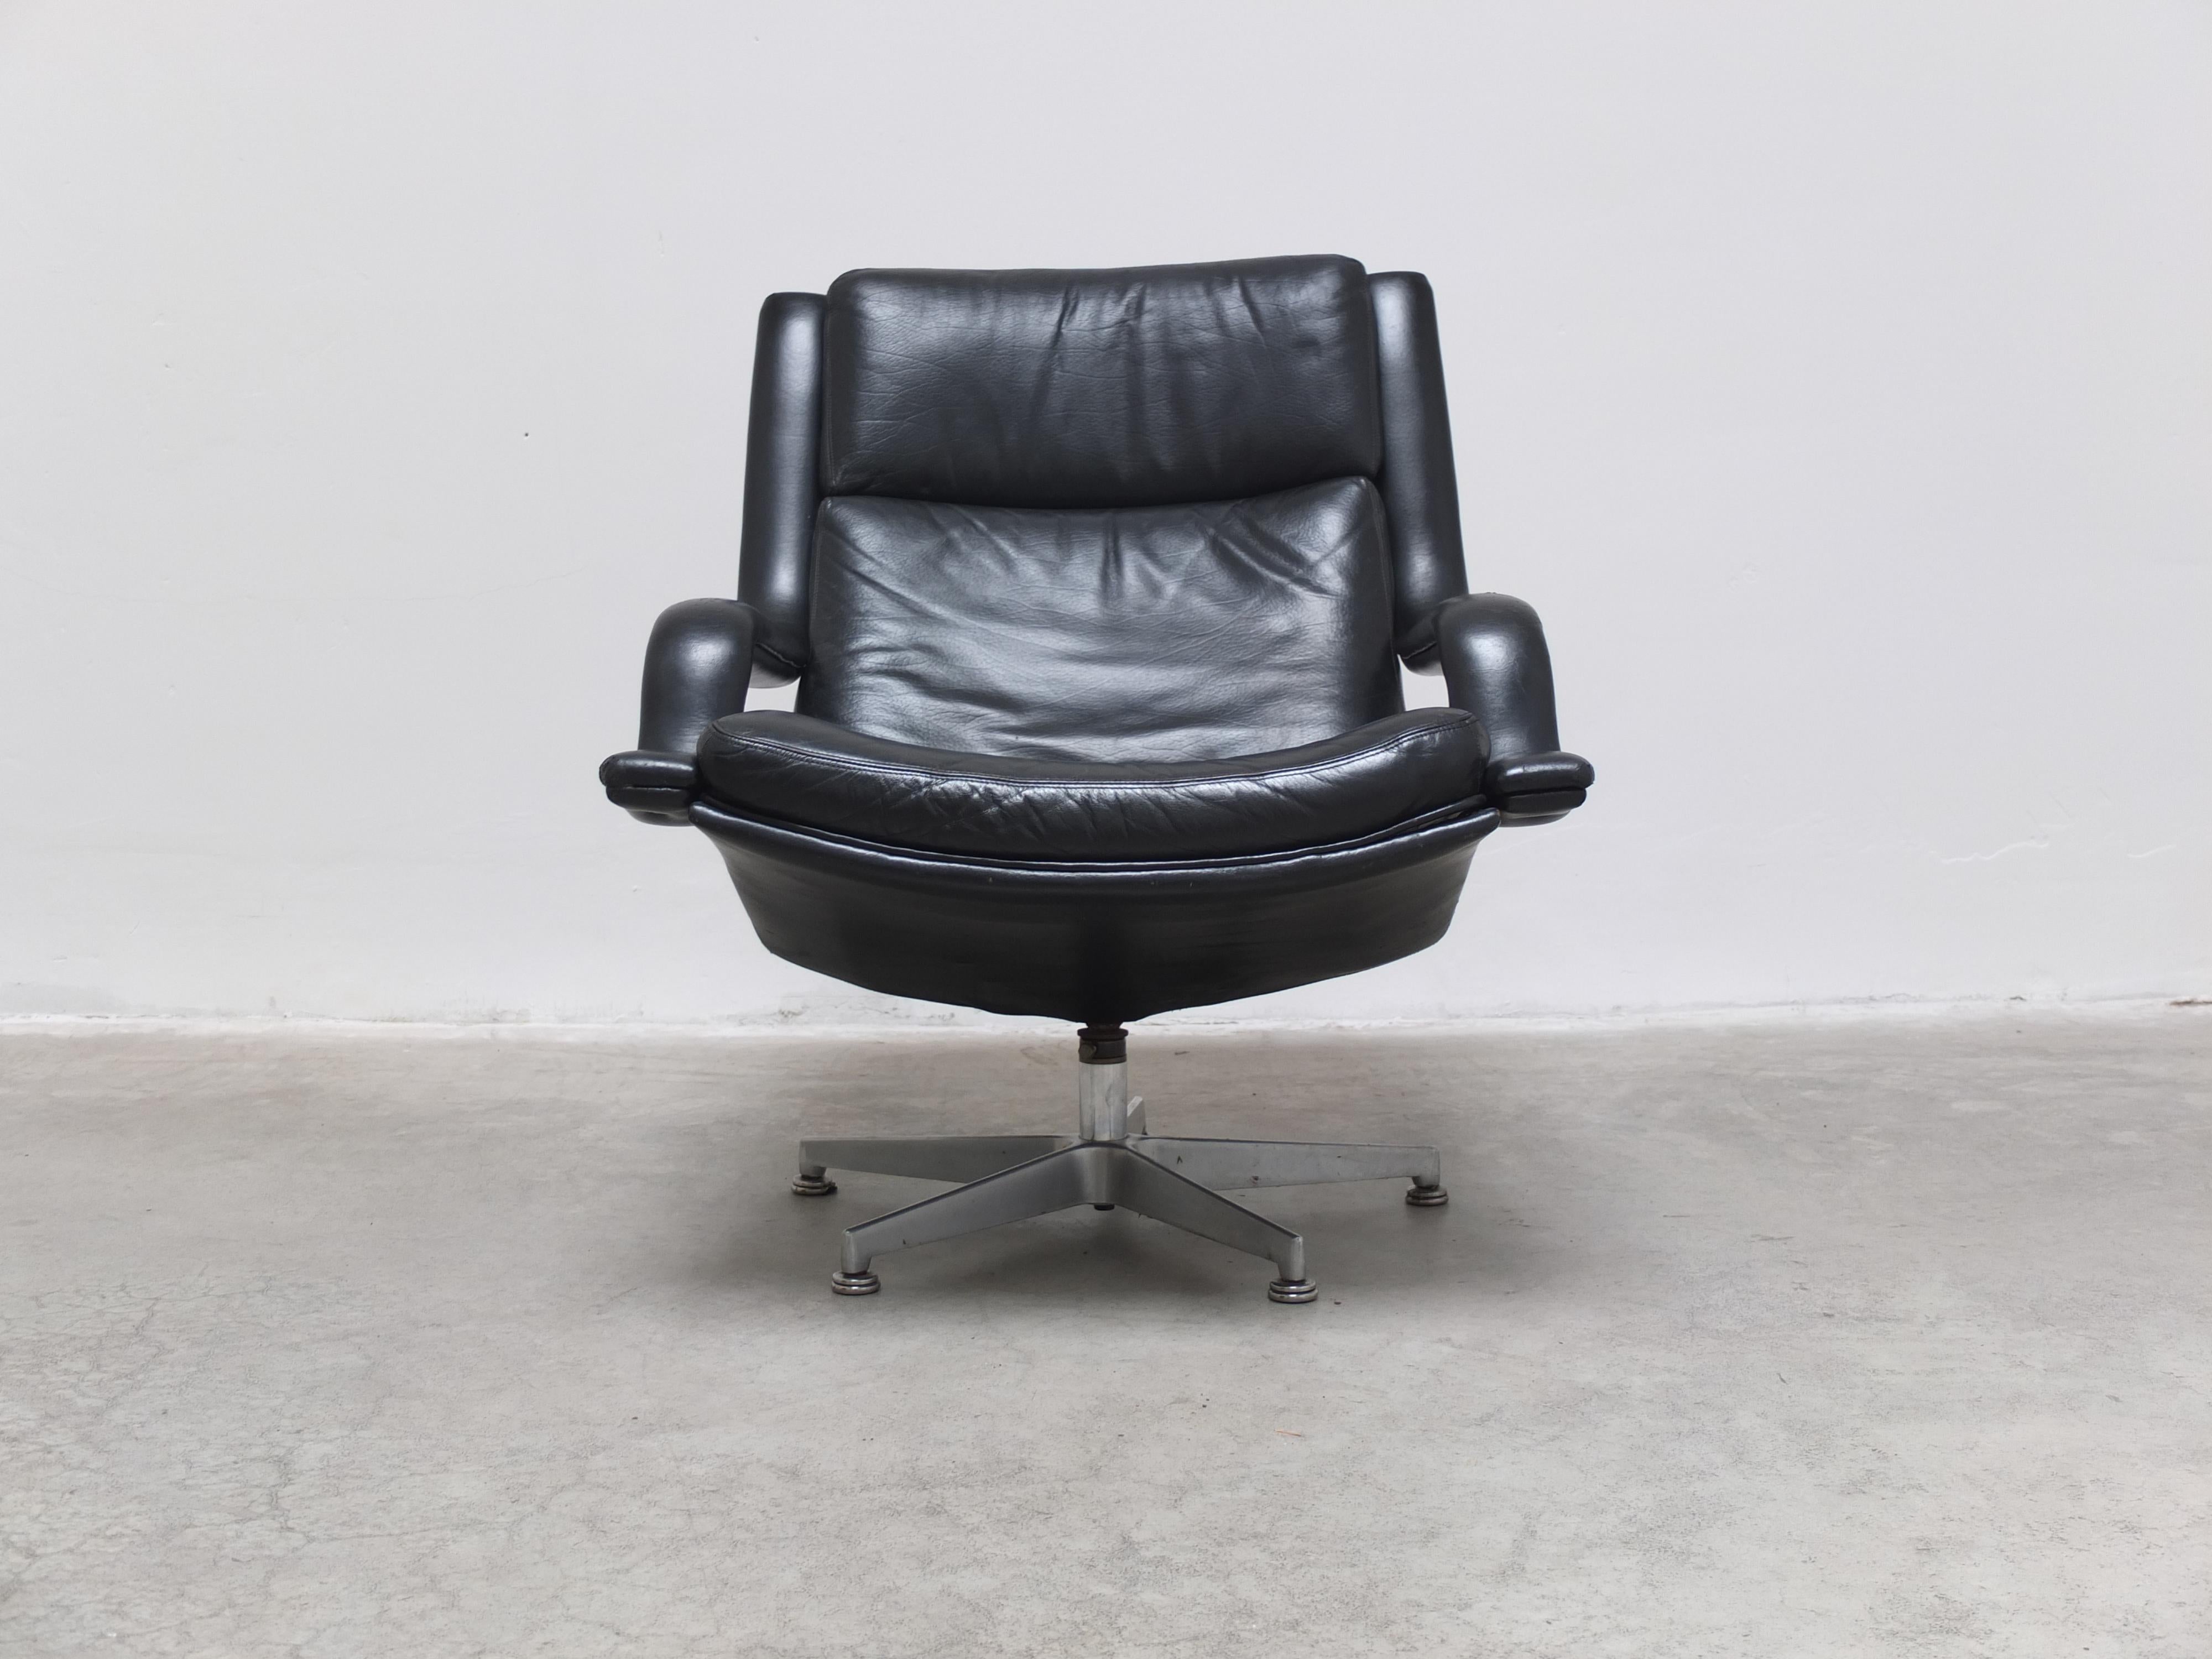 Leather 'F152' Swivel Lounge Chairs by Geoffrey Harcourt for Artifort, 1970s For Sale 5